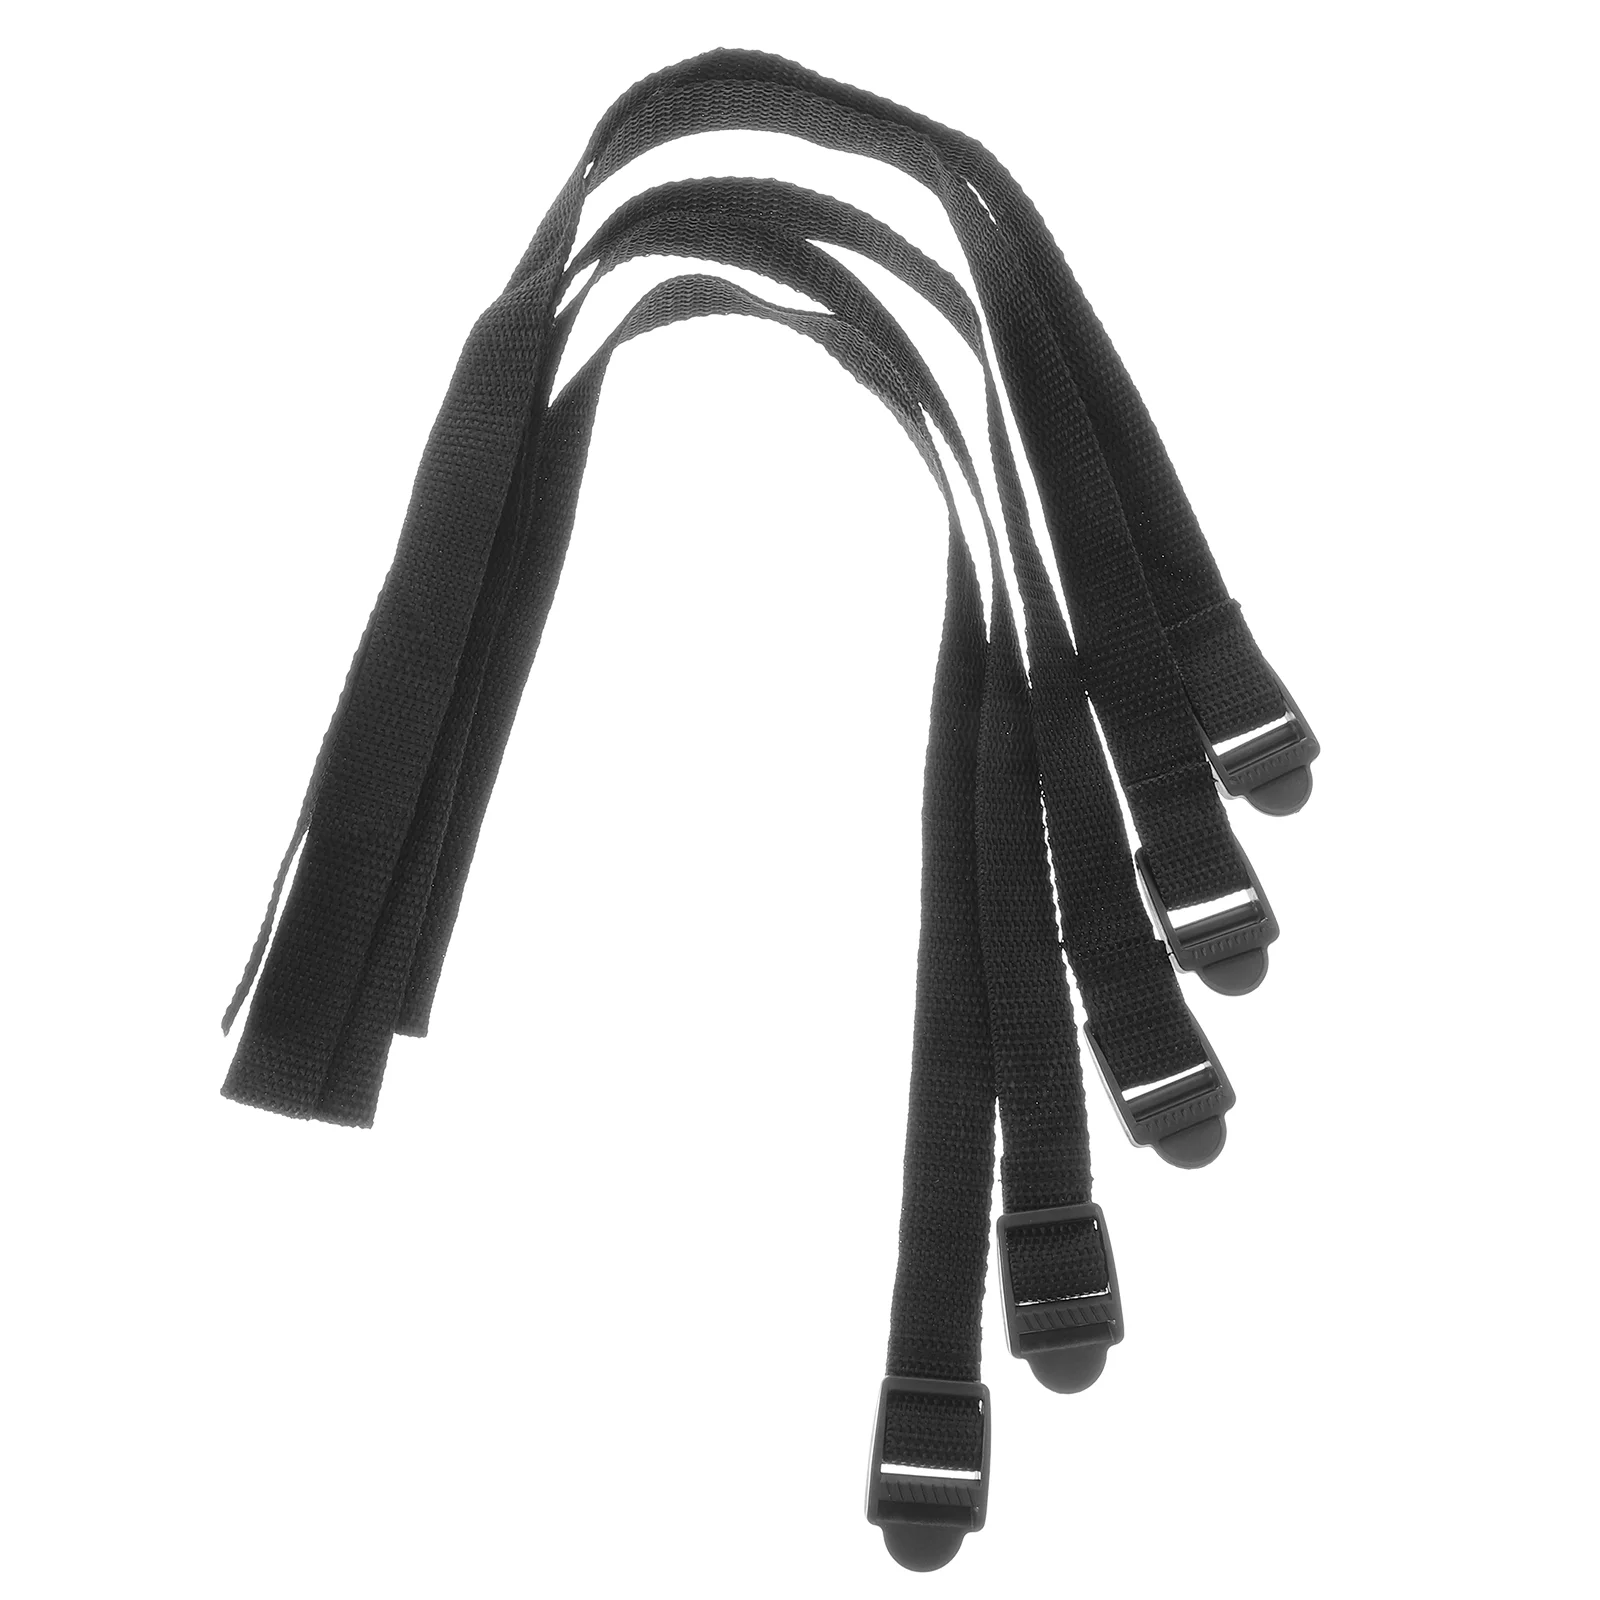 

5pcs Professional Ski Stick Straps Alpenstocks Binding Band Protective Tie for Outdoor Sports